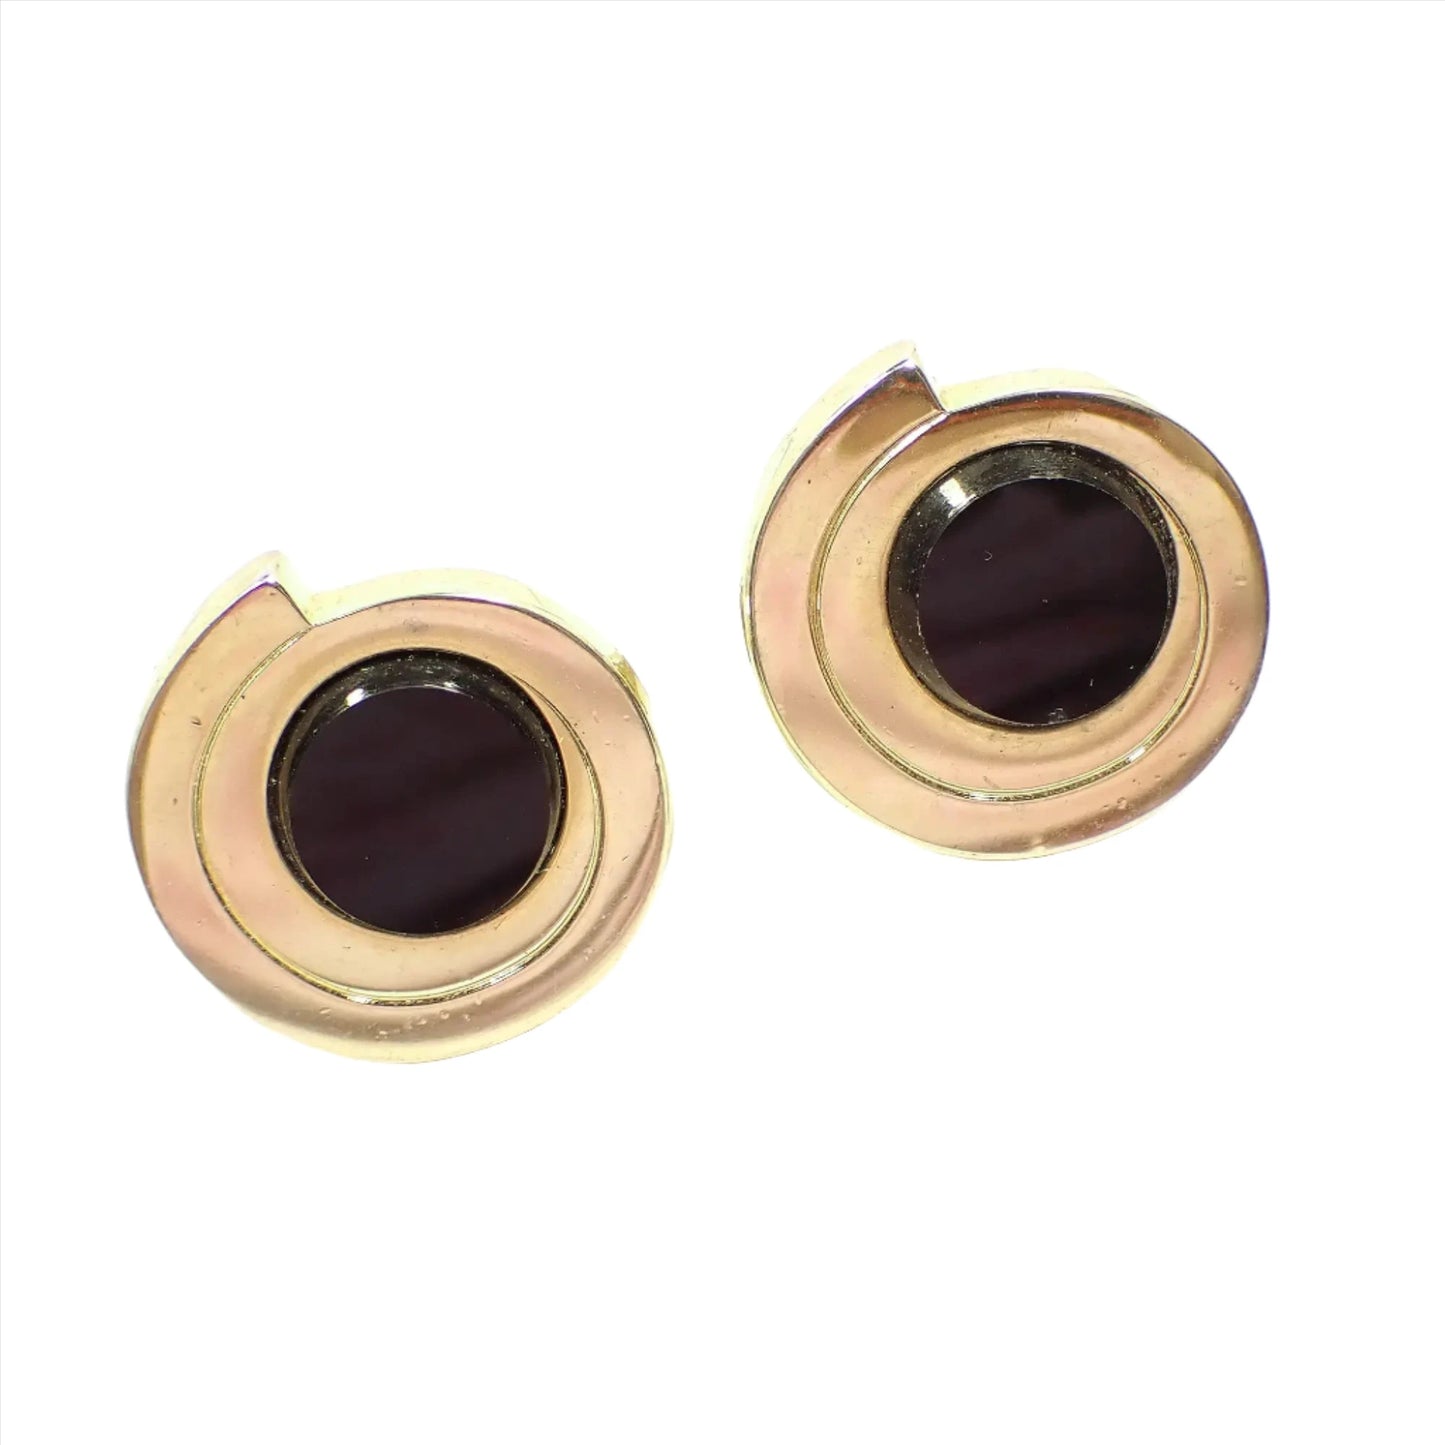 Angled front view of the retro vintage Pierre Cardin cufflinks. The metal is gold tone in color. They look like a bar that is shaped around itself in a circle shape. There are round flat top black onyx gemstone cabs in the middle.